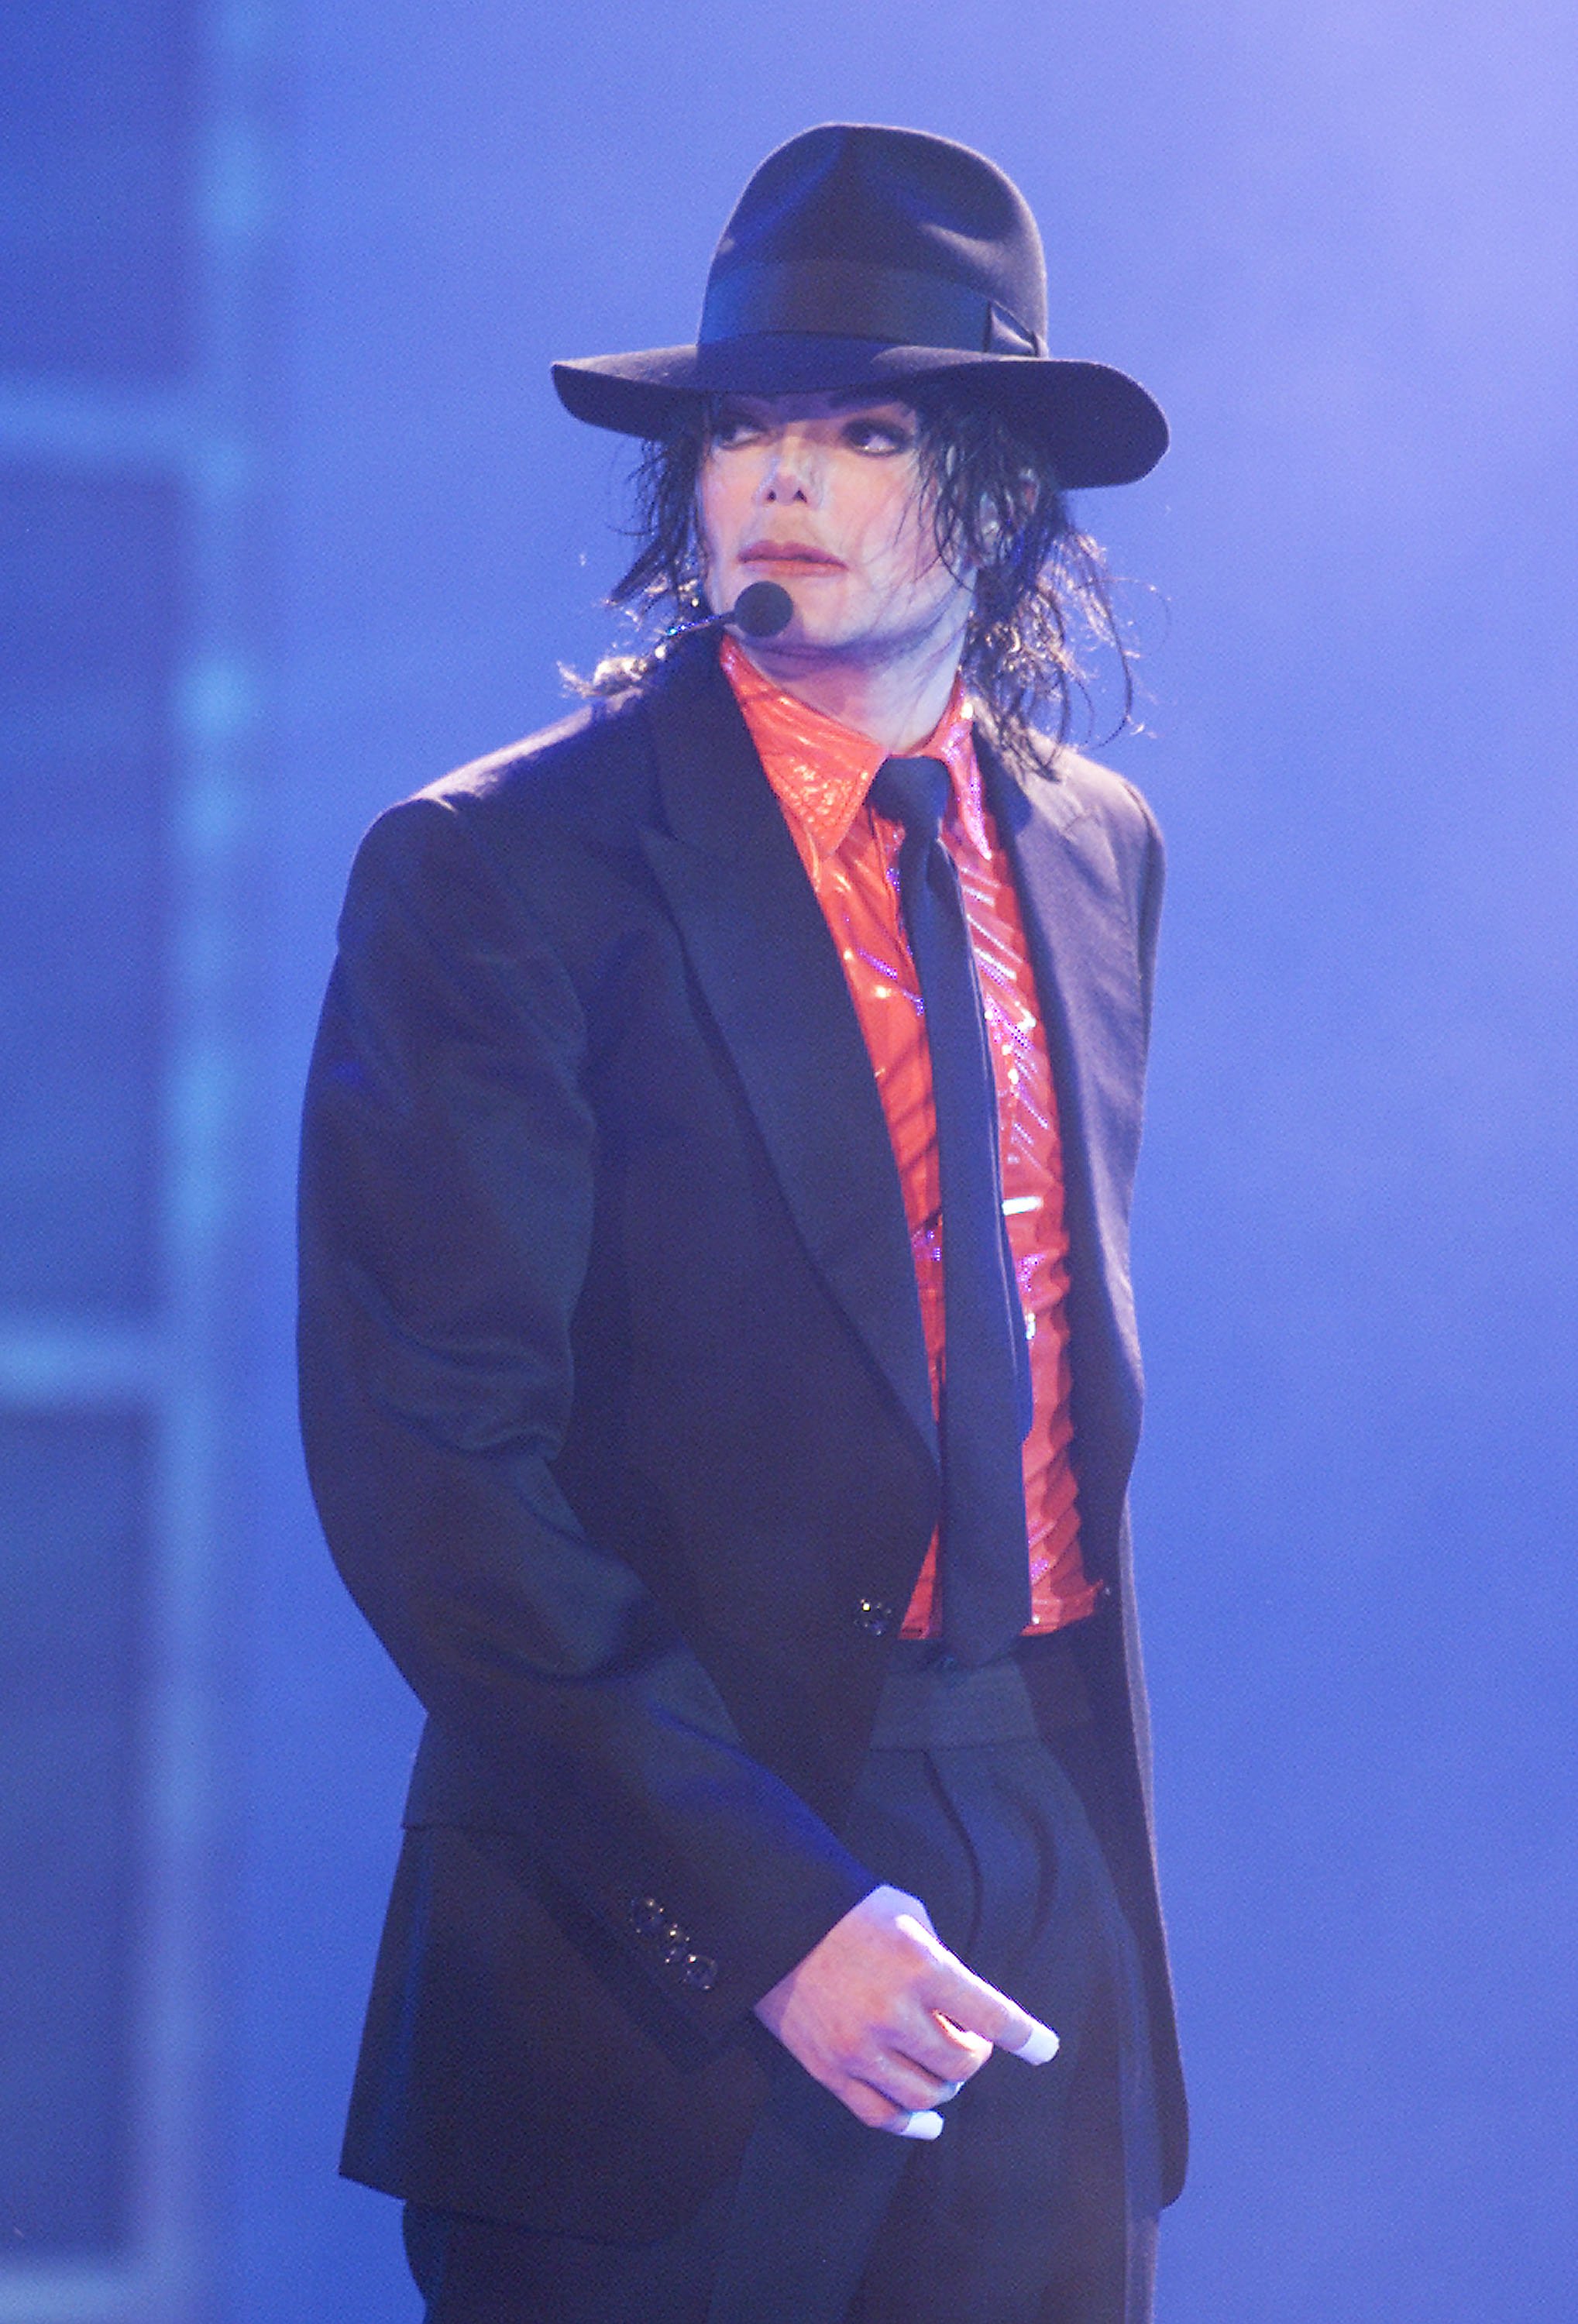 Michael Jackson performs at the taping of "American Bandstand's 50th...A Celebration" at the Pasadena Civic Auditorium, April 20, 2002. | Source: Getty Images